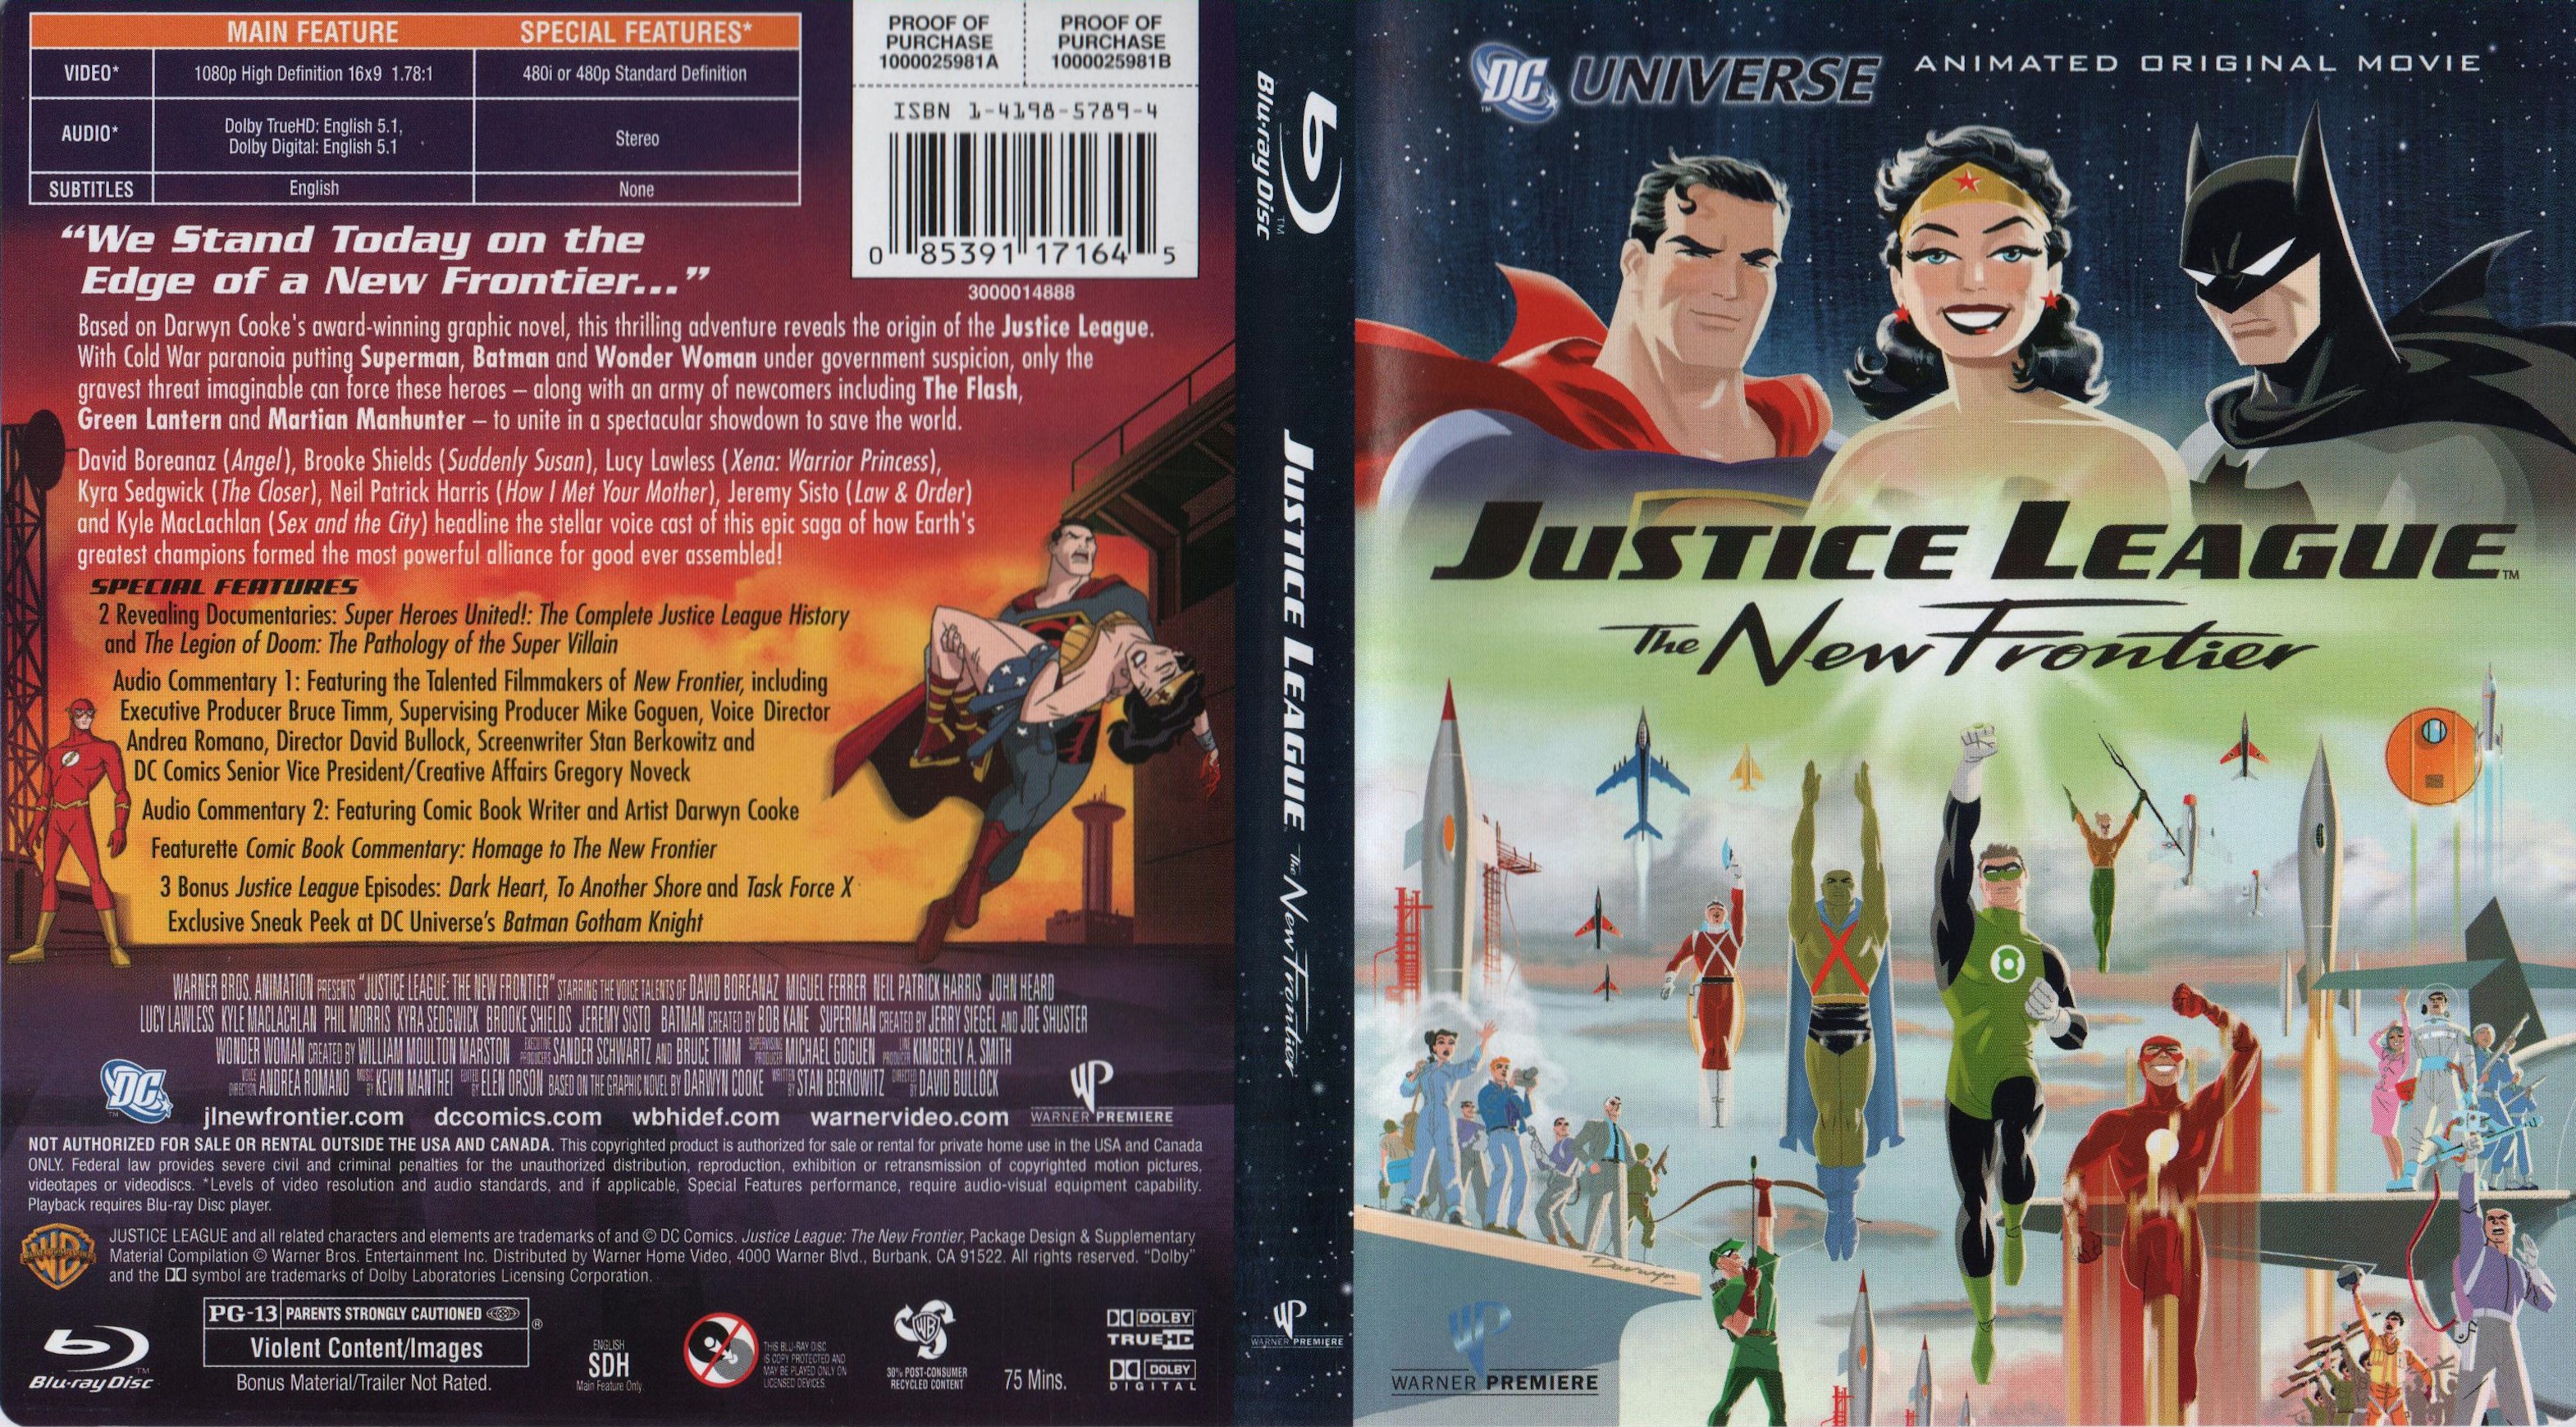 Jaquette DVD Justice League -  The New Frontier Zone 1 (BLU-RAY)